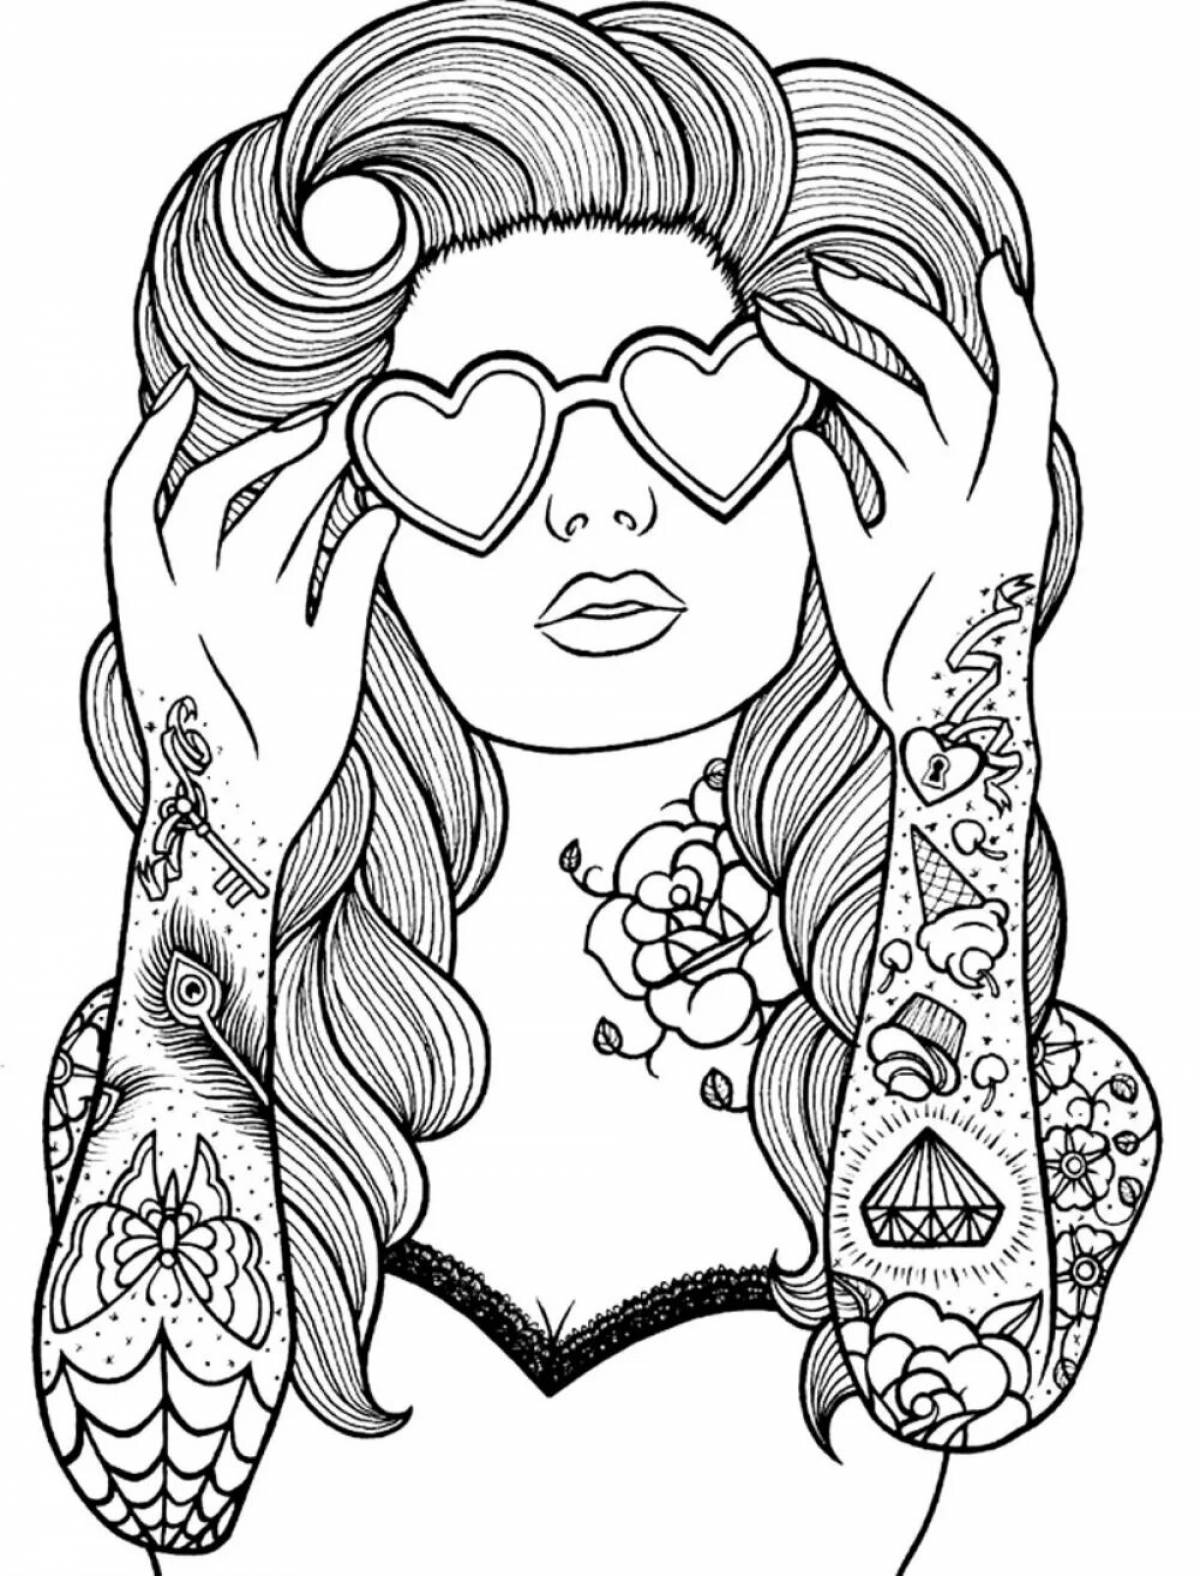 Cool glowing coloring pages for adults